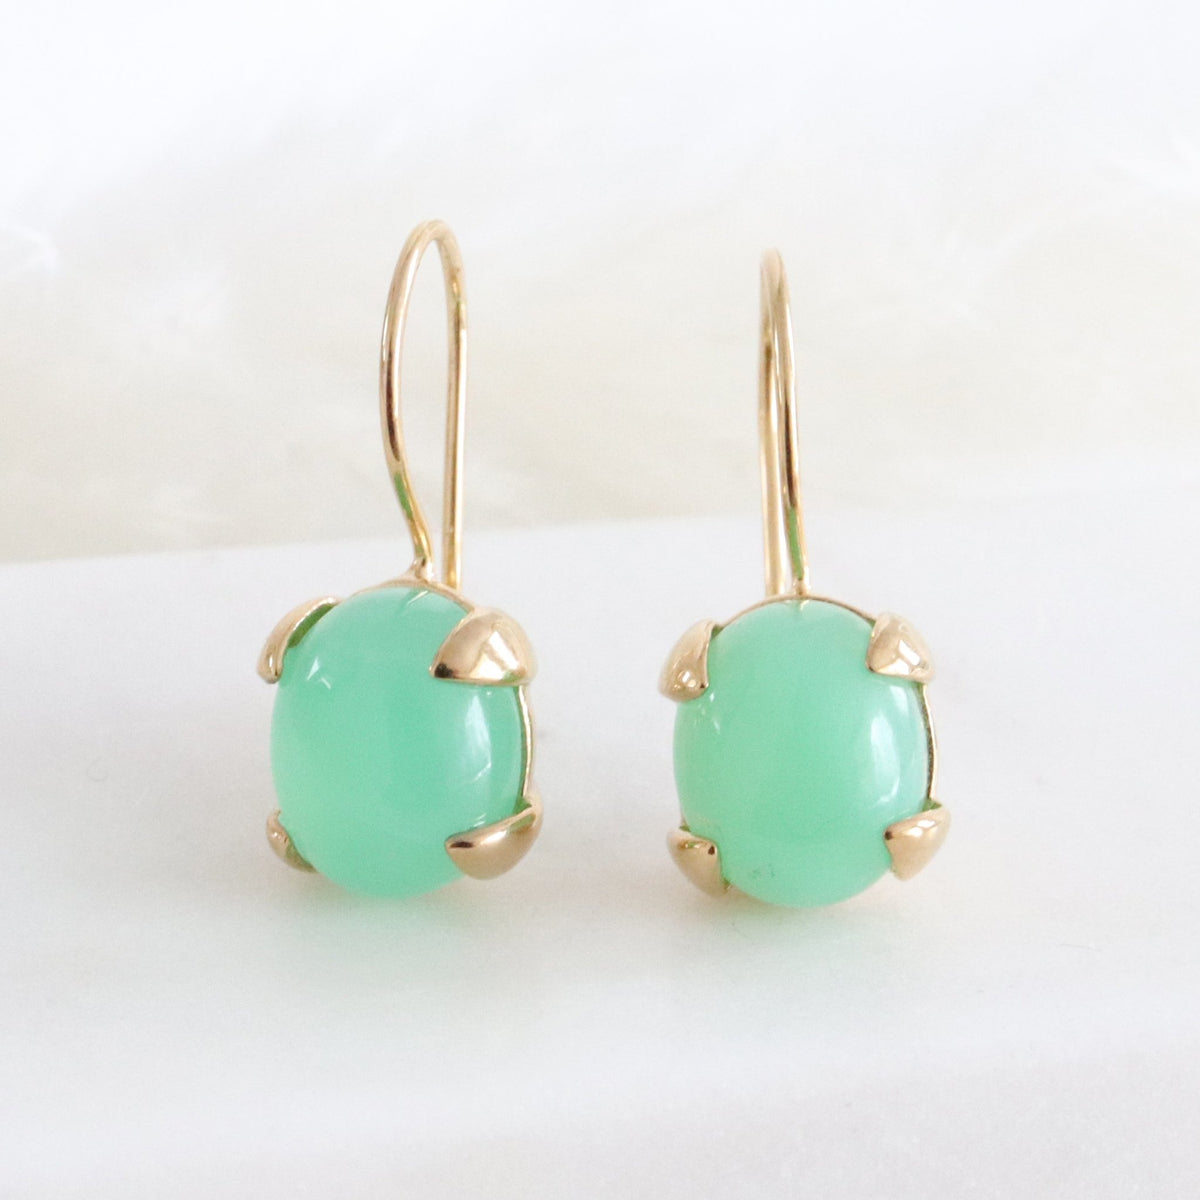 GLEE DROP EARRINGS - CHRYSOPRASE &amp; GOLD - SO PRETTY CARA COTTER